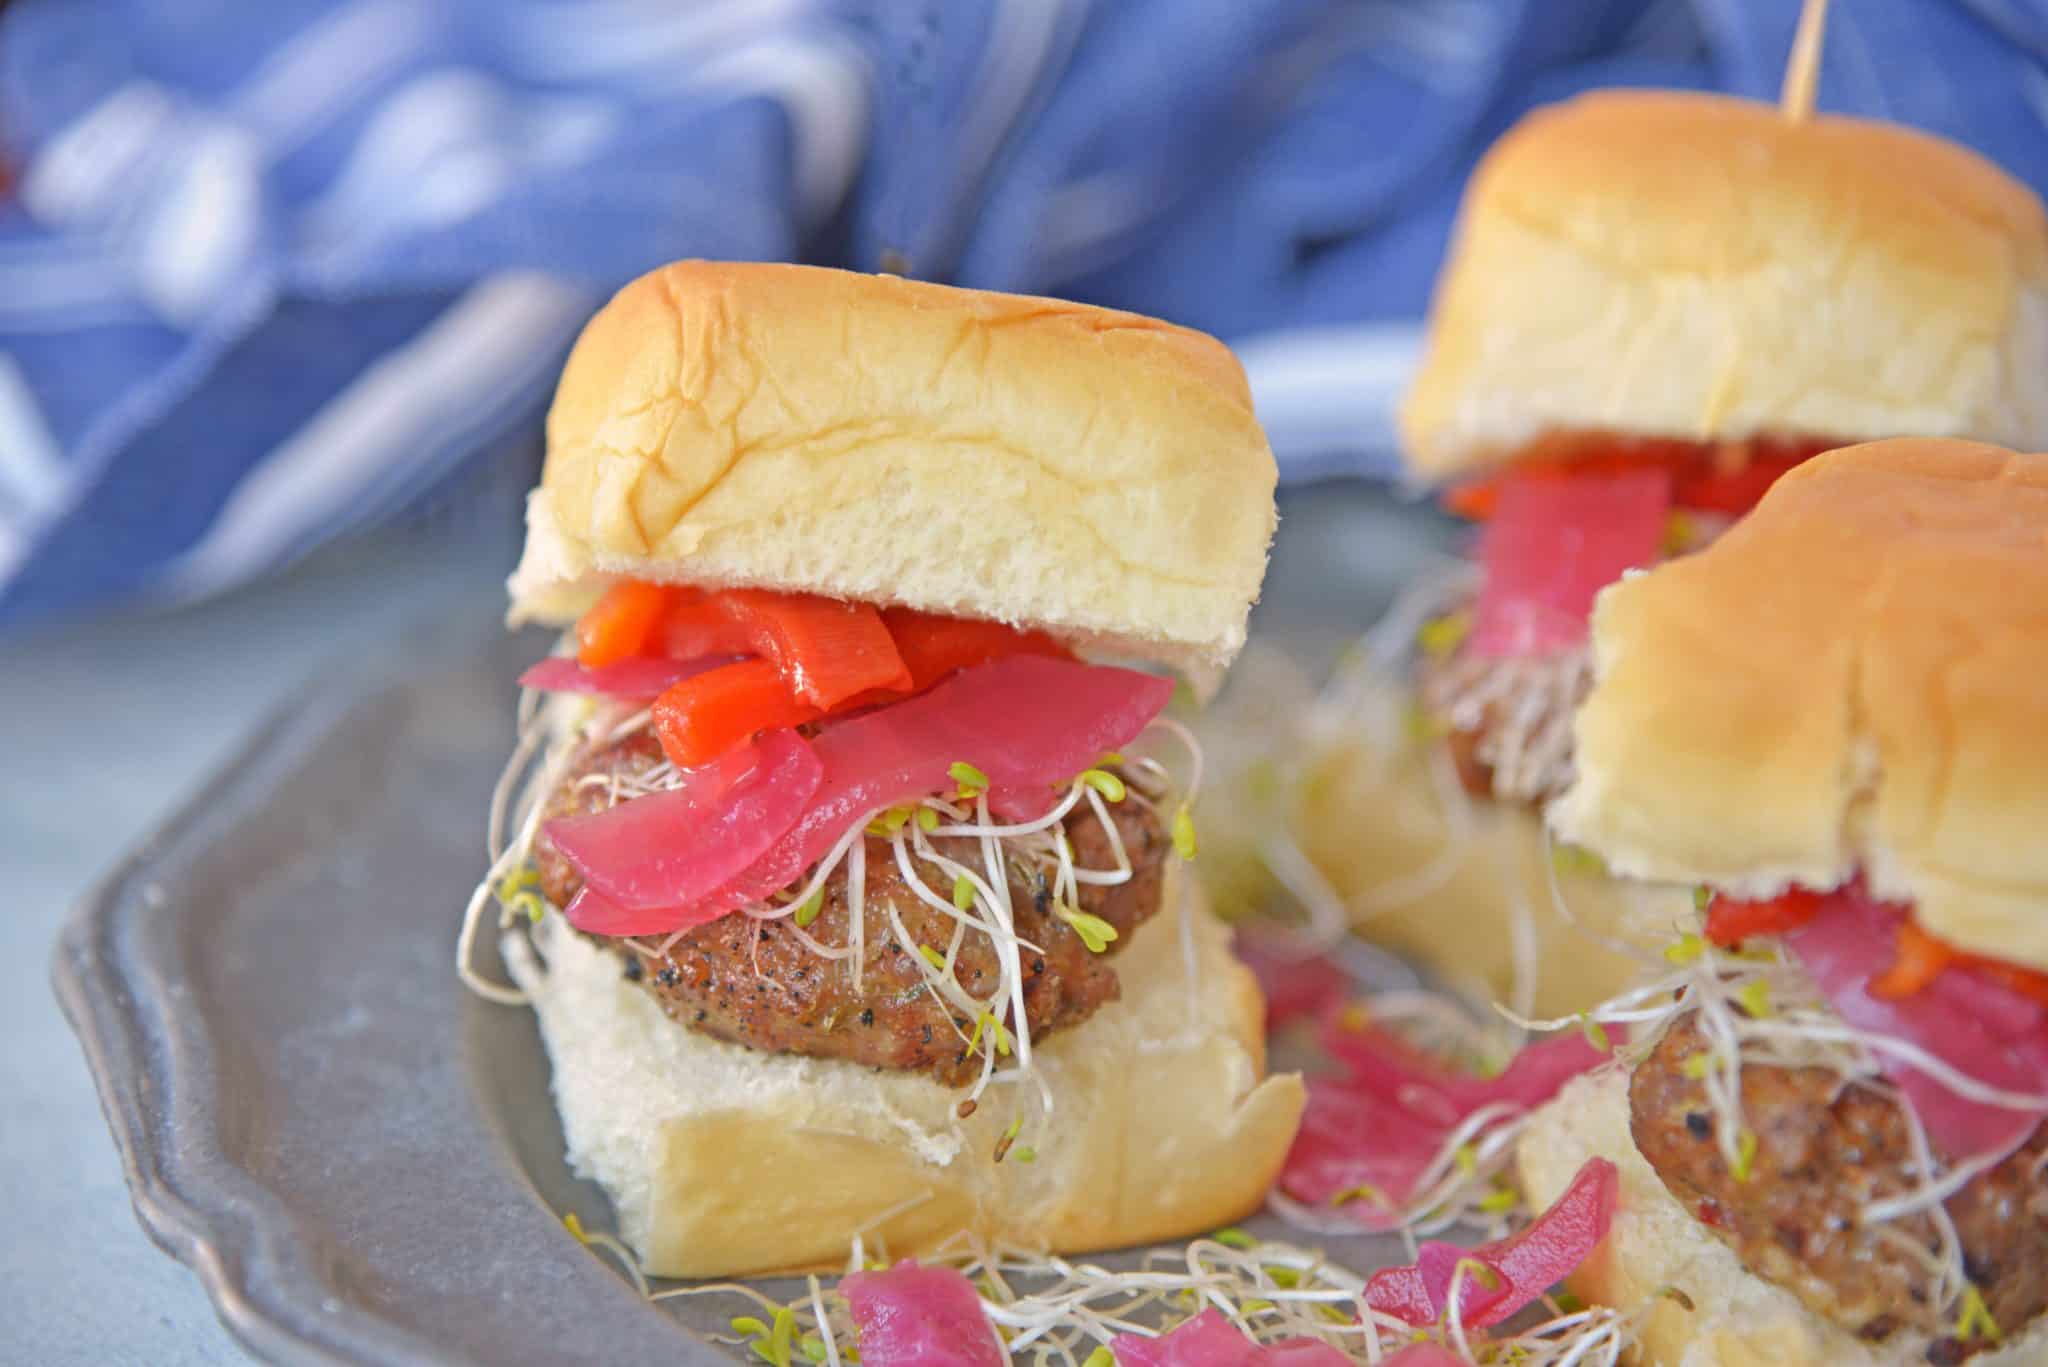 Italian sausage slider sandwich recipes on a silver plate